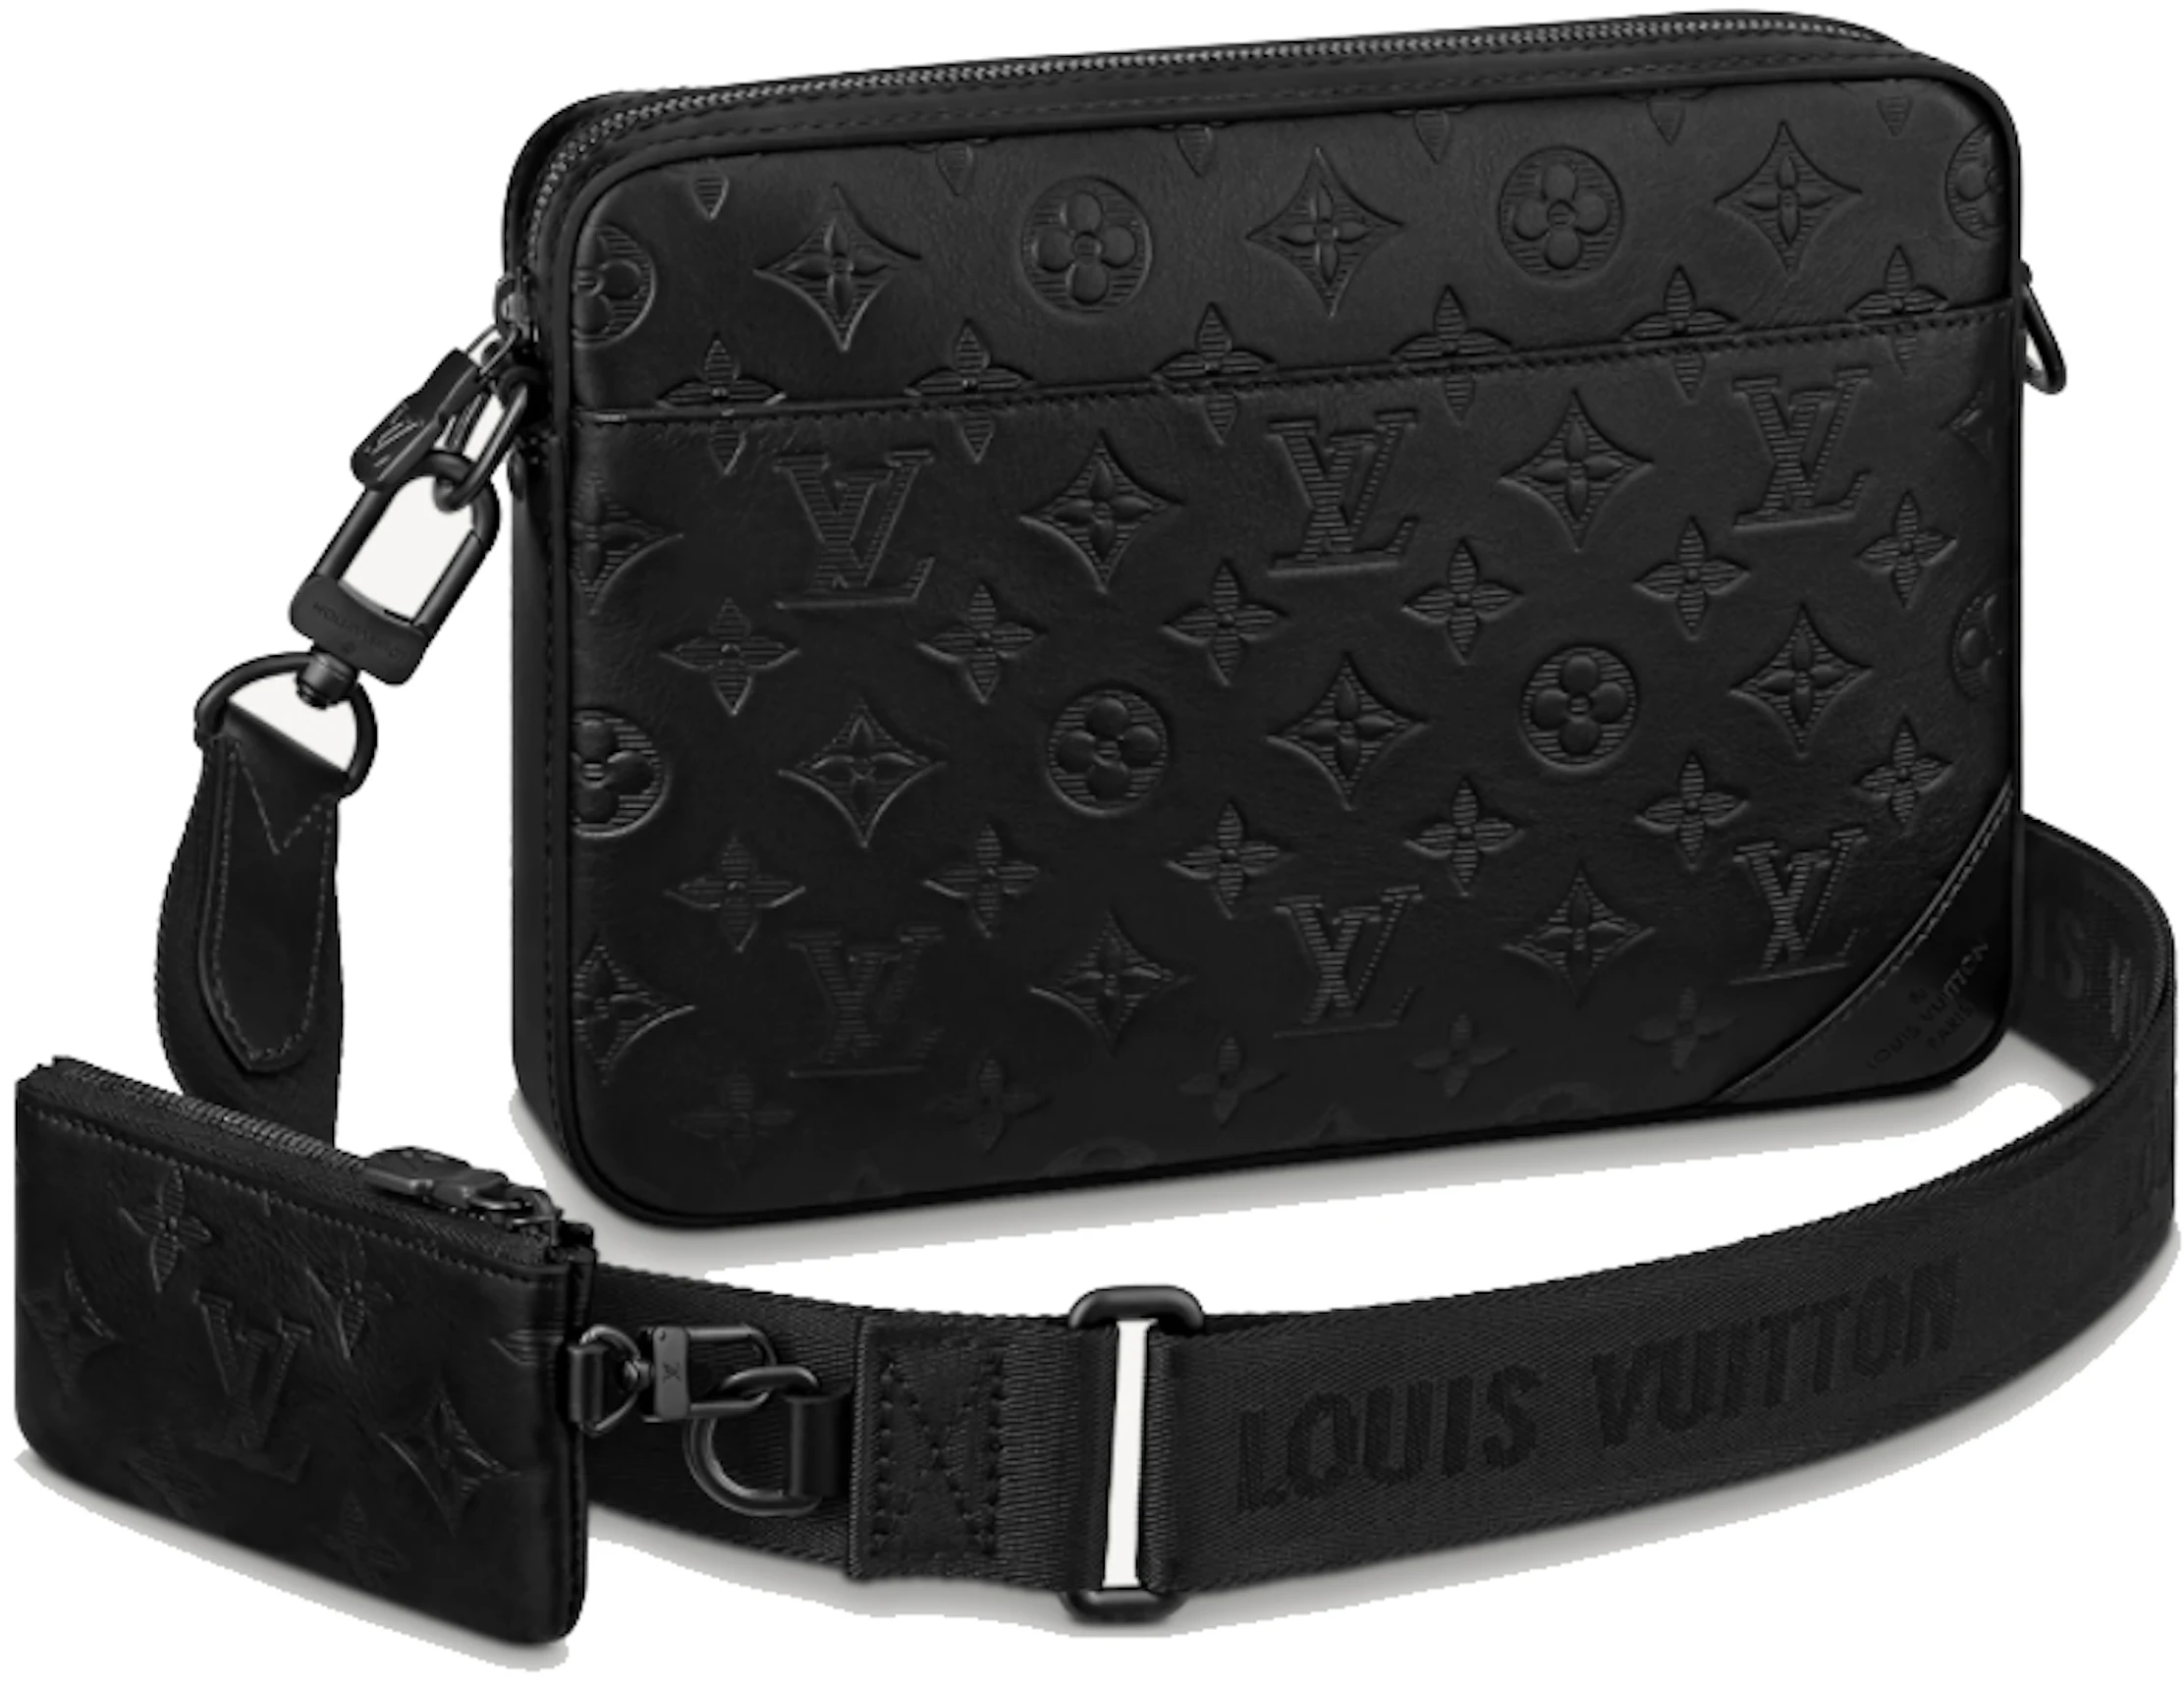 Duo Messenger Black in Leather Black-tone - US